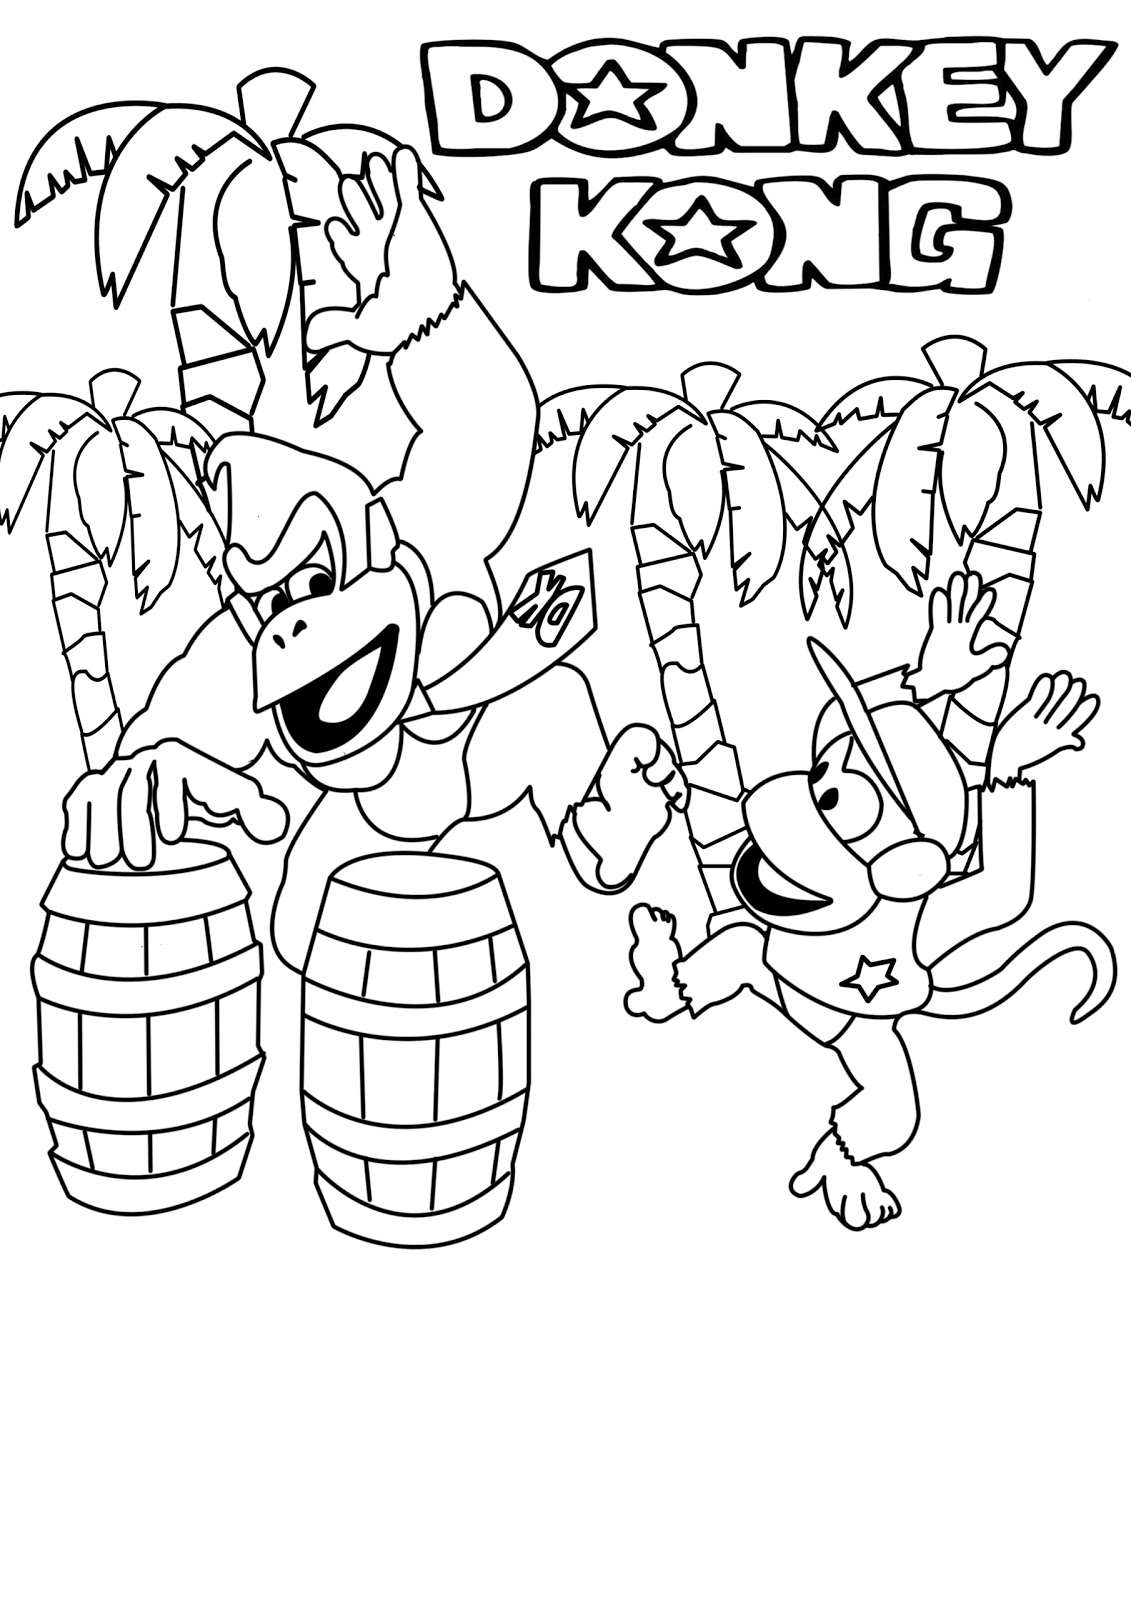 Donkey Kong Coloring Pages All Free Coloring Page For Kids